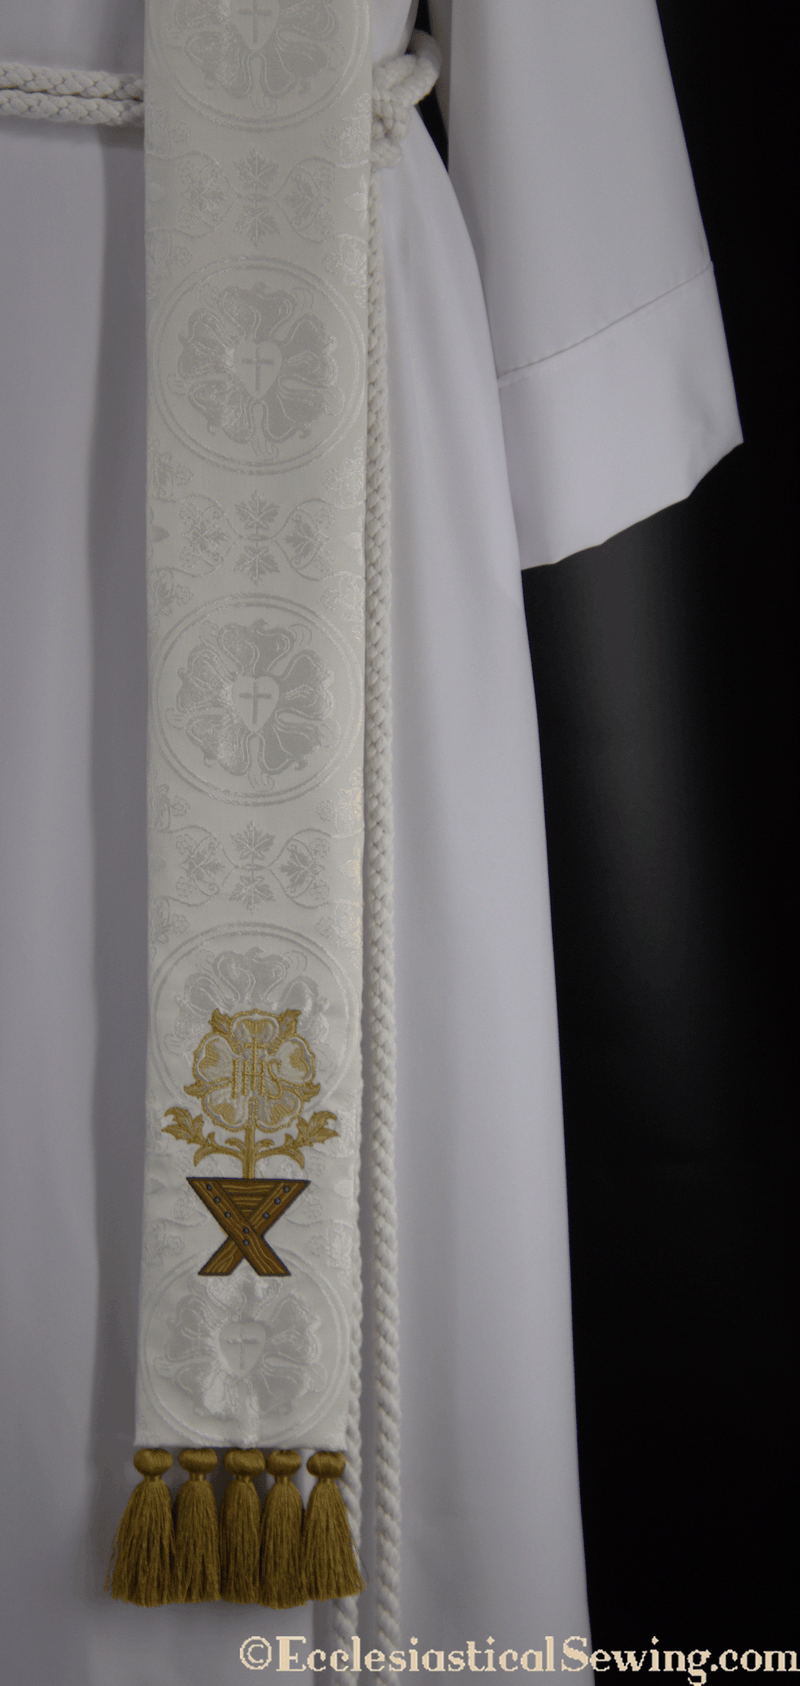 files/white-clergy-stole-or-christmas-rose-easter-collection-style-1-ecclesiastical-sewing-2.png